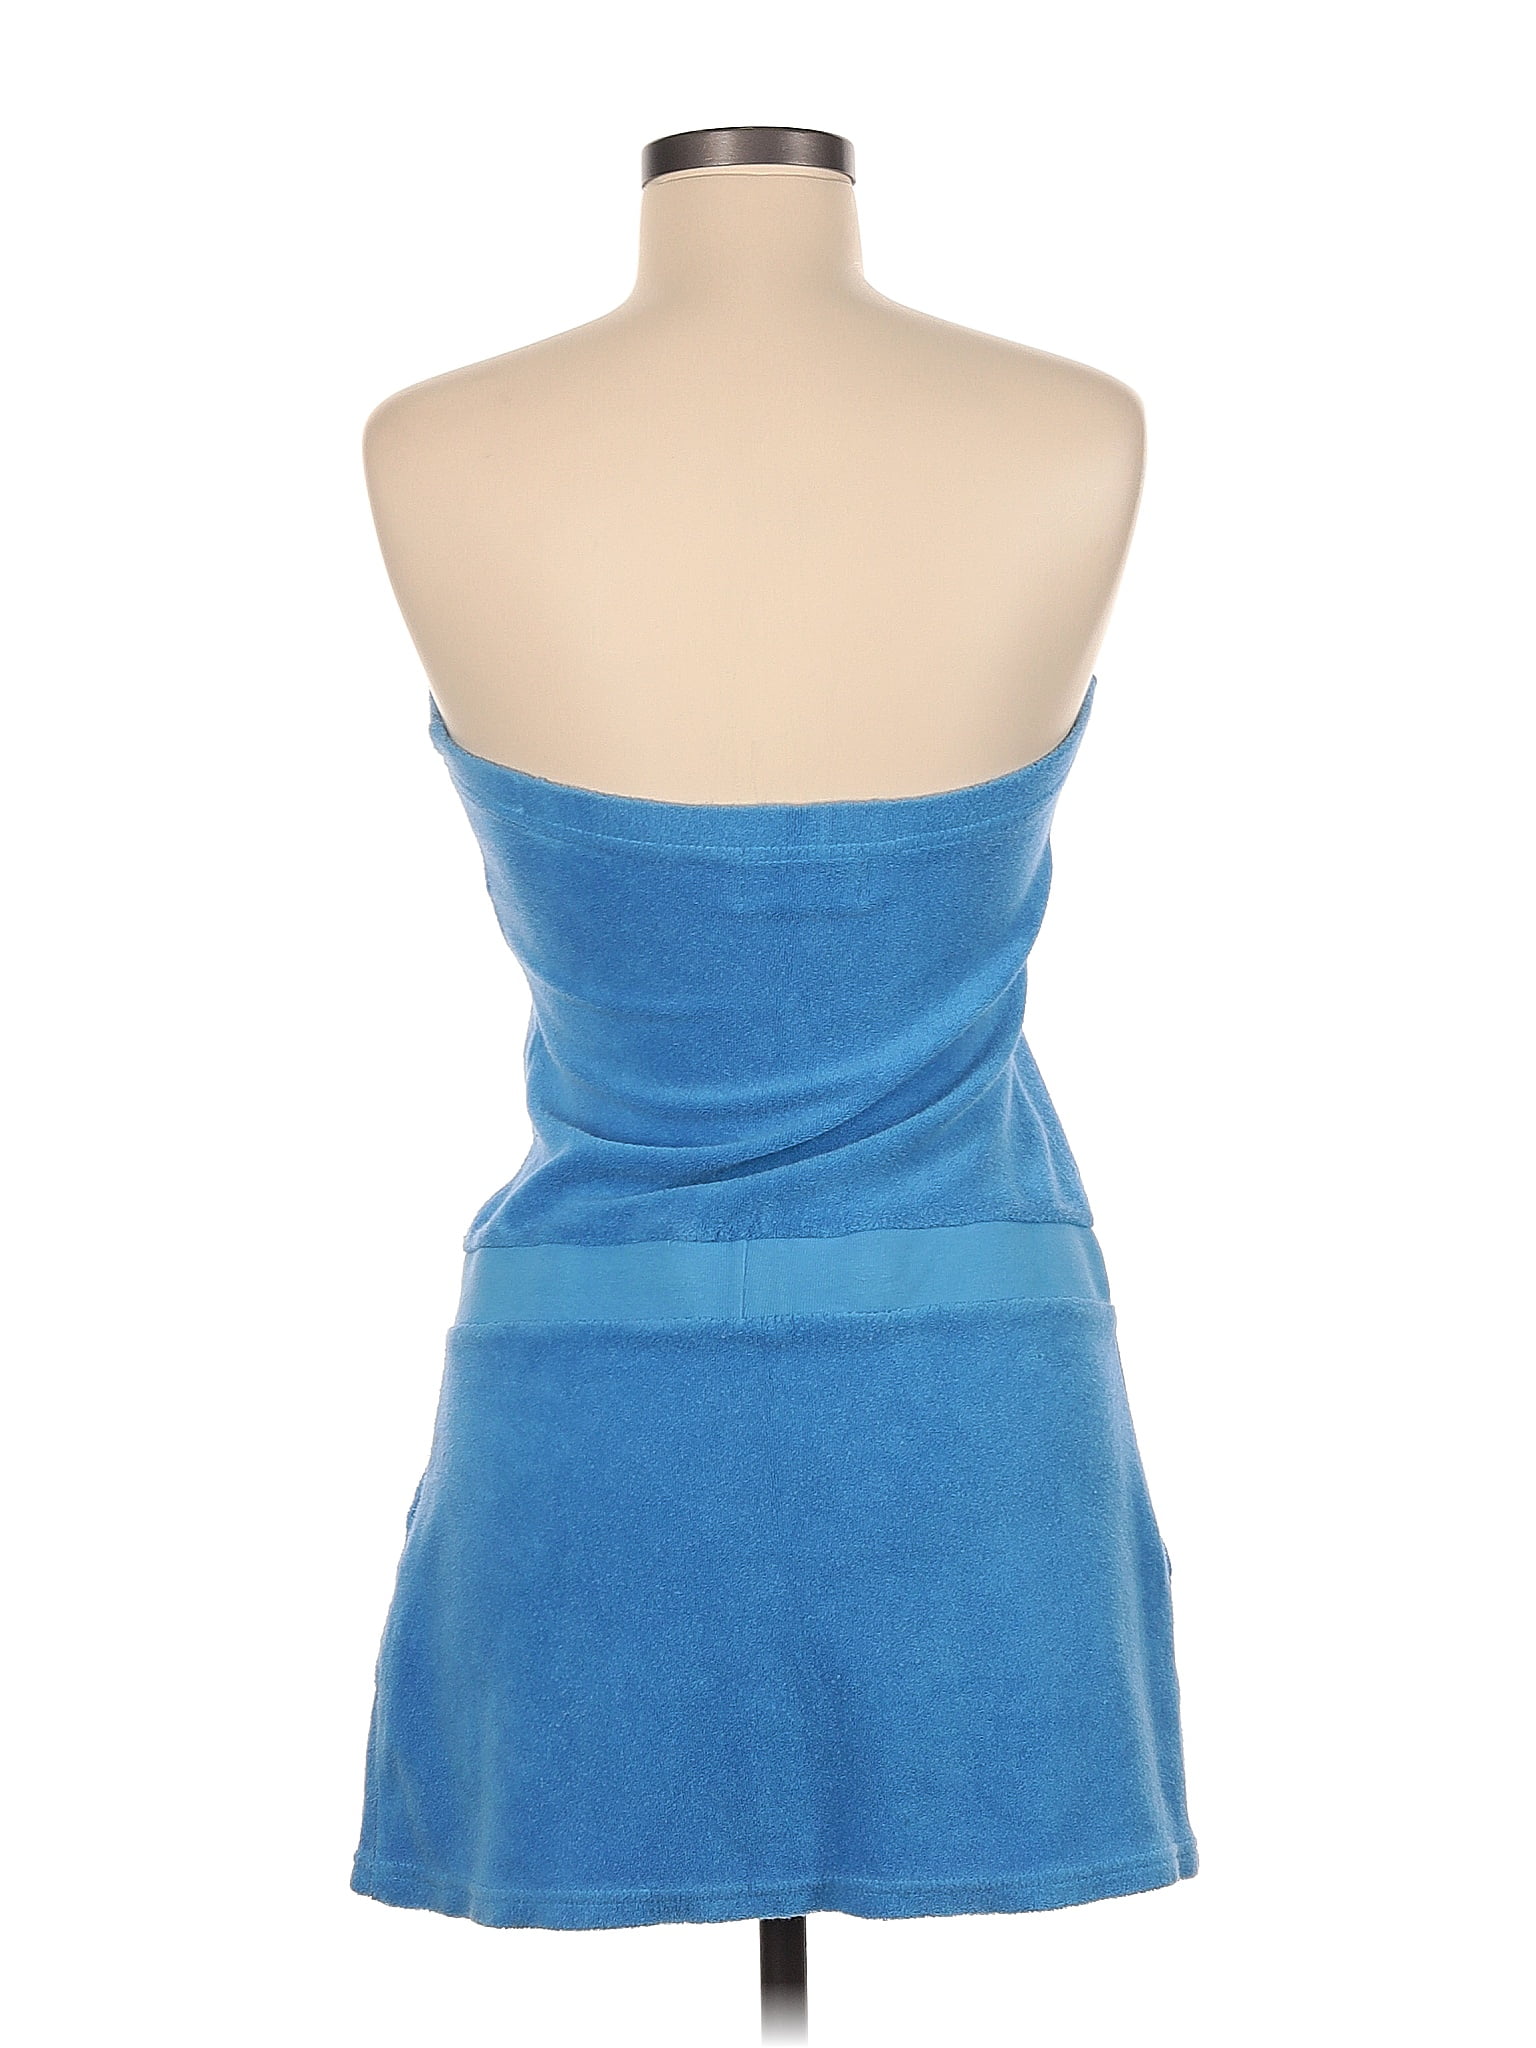 Juicy Couture Solid Blue Casual Dress Size M - 67% off